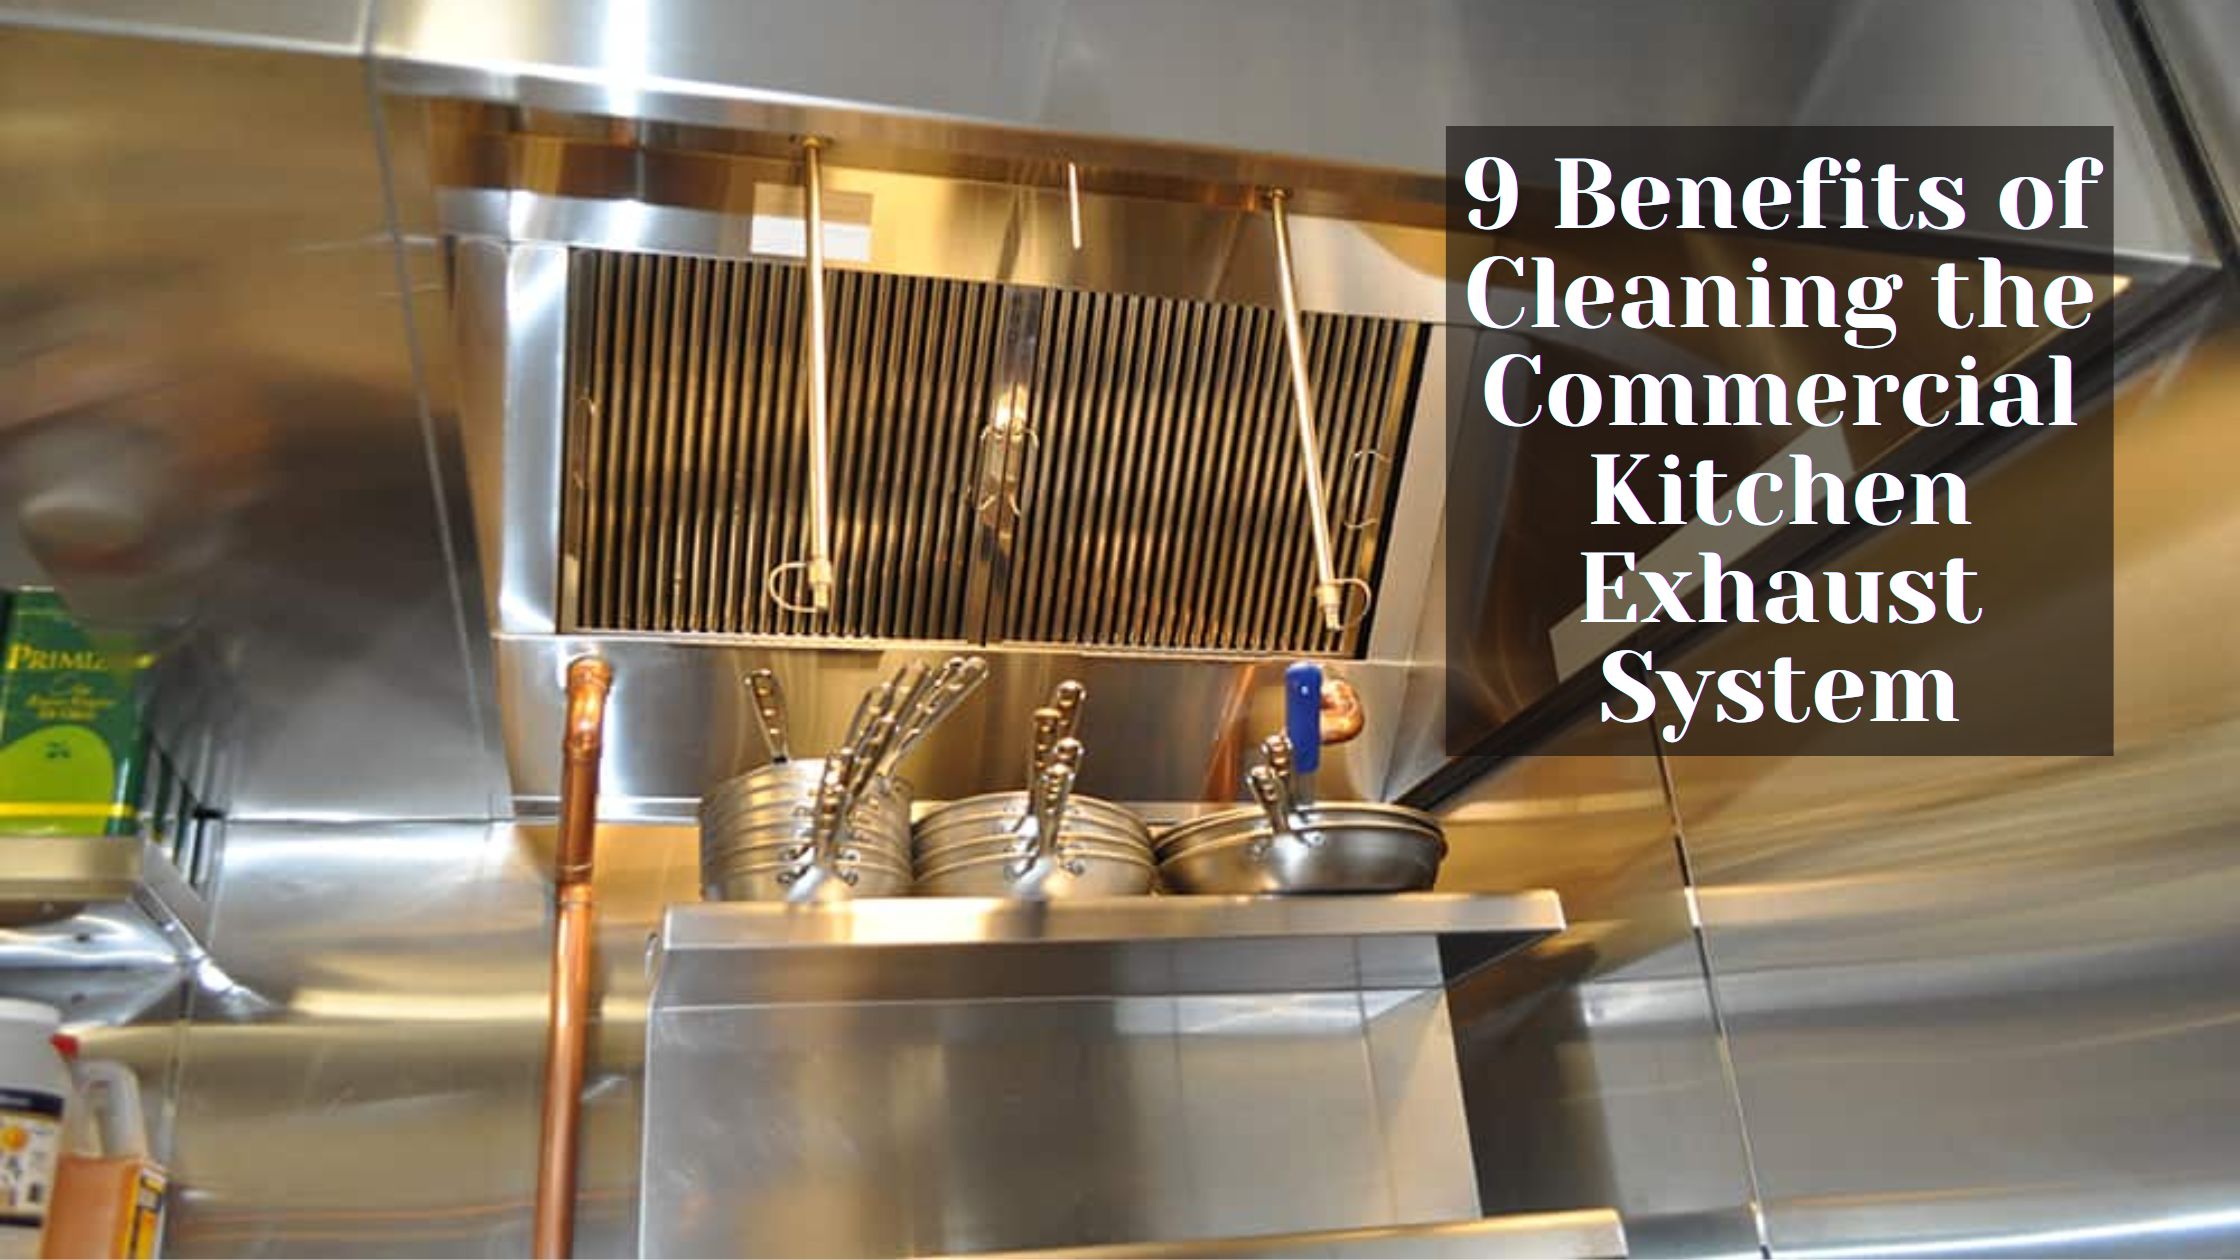 9 Benefits of Cleaning the Commercial Kitchen Exhaust System